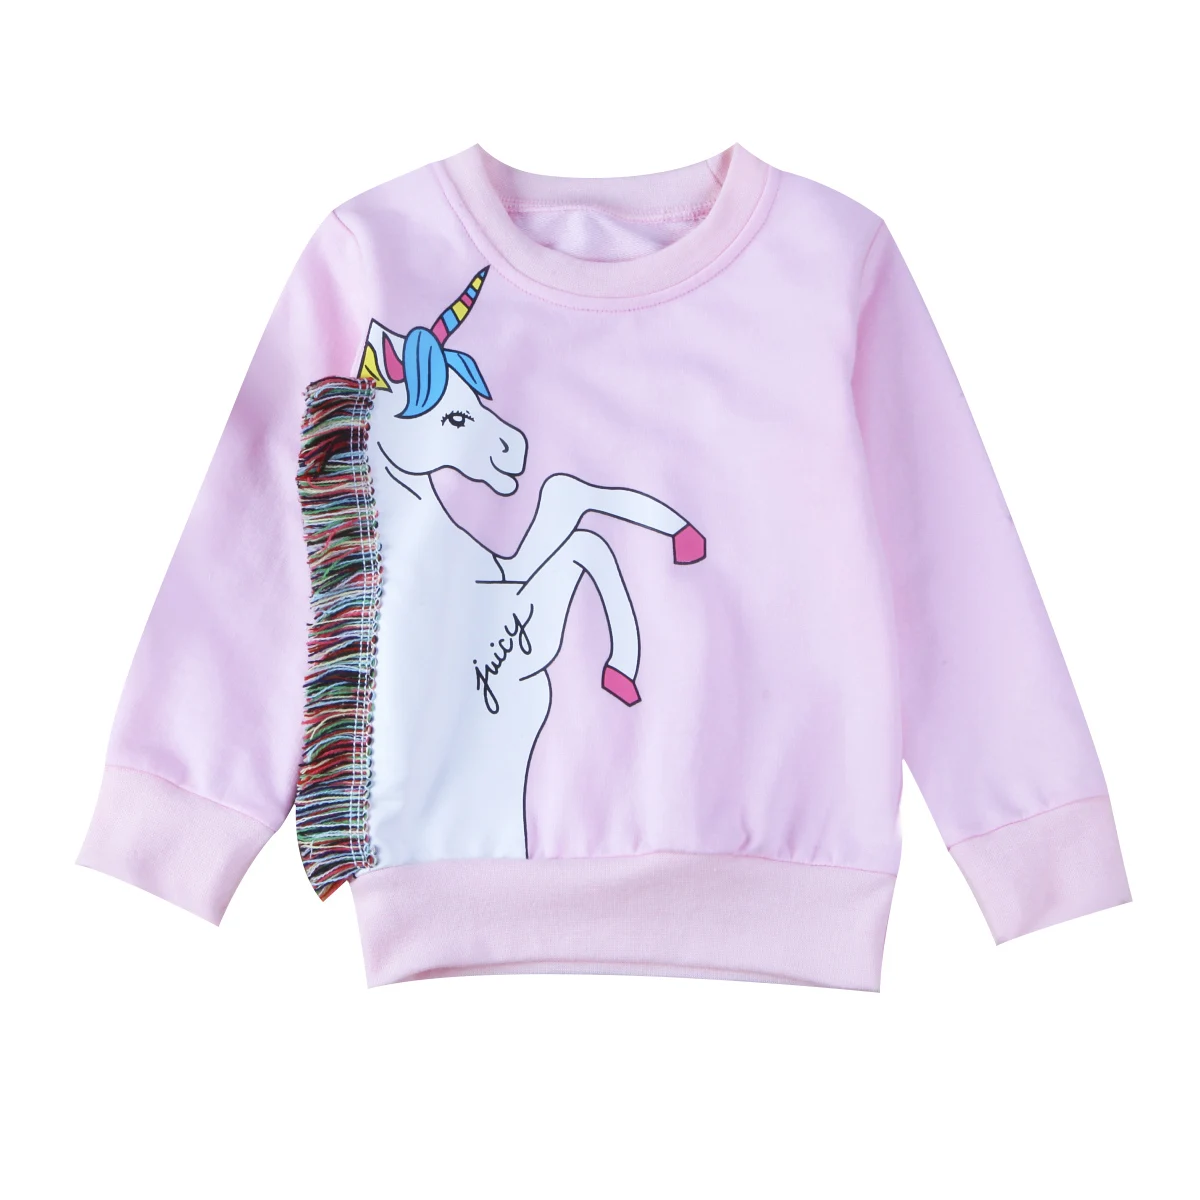 LXKA Girls Sweatshirts Jumper Kids Unicorn Rainbow Shark Clothes Cotton for Toddler Girl Long Sleeve T Shirts Tops Pullover Age 1-7 Years 